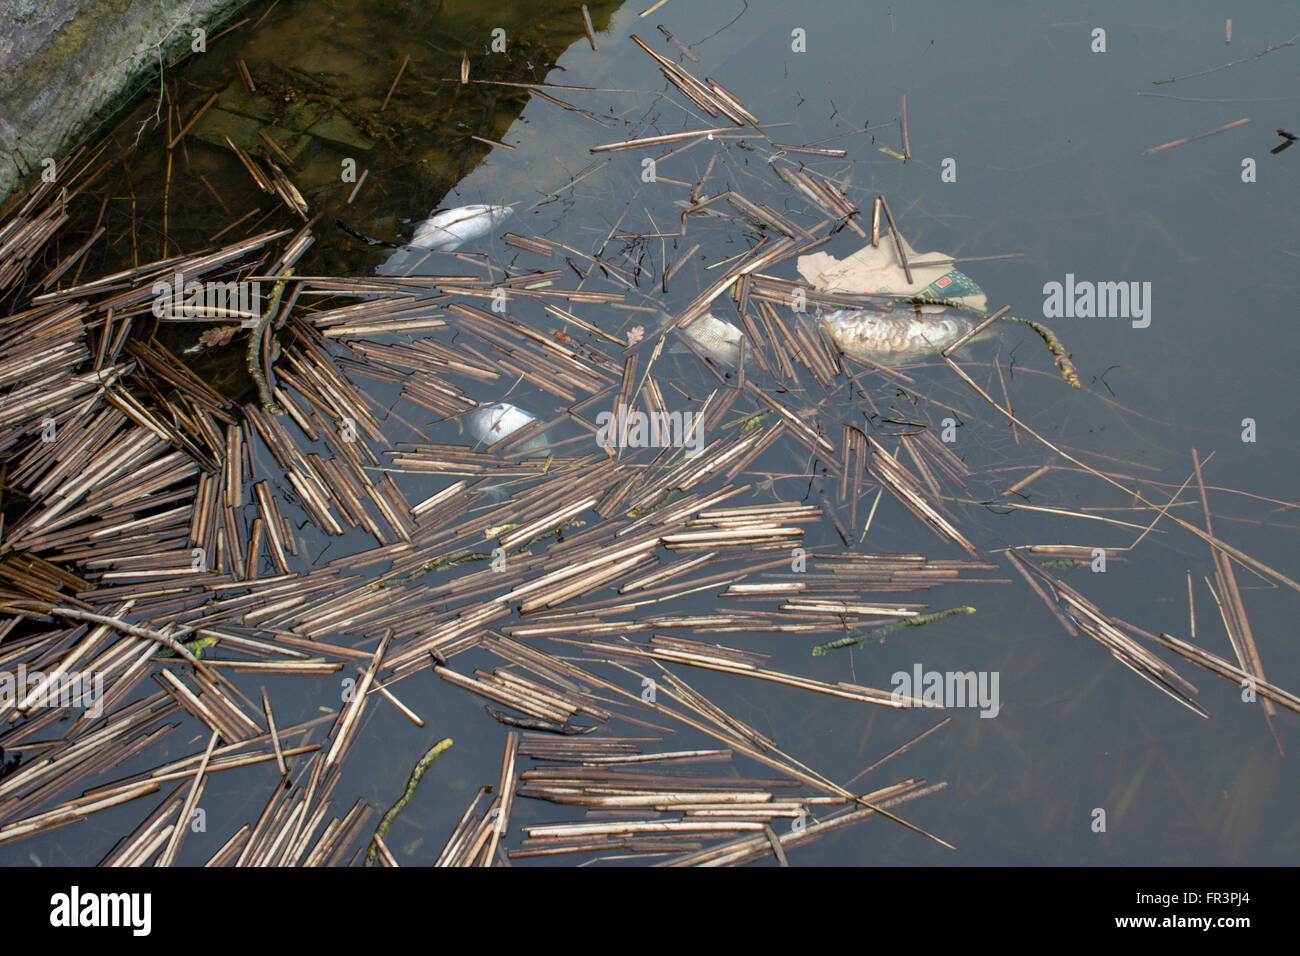 Four dead fish on the edge of a pond Stock Photo